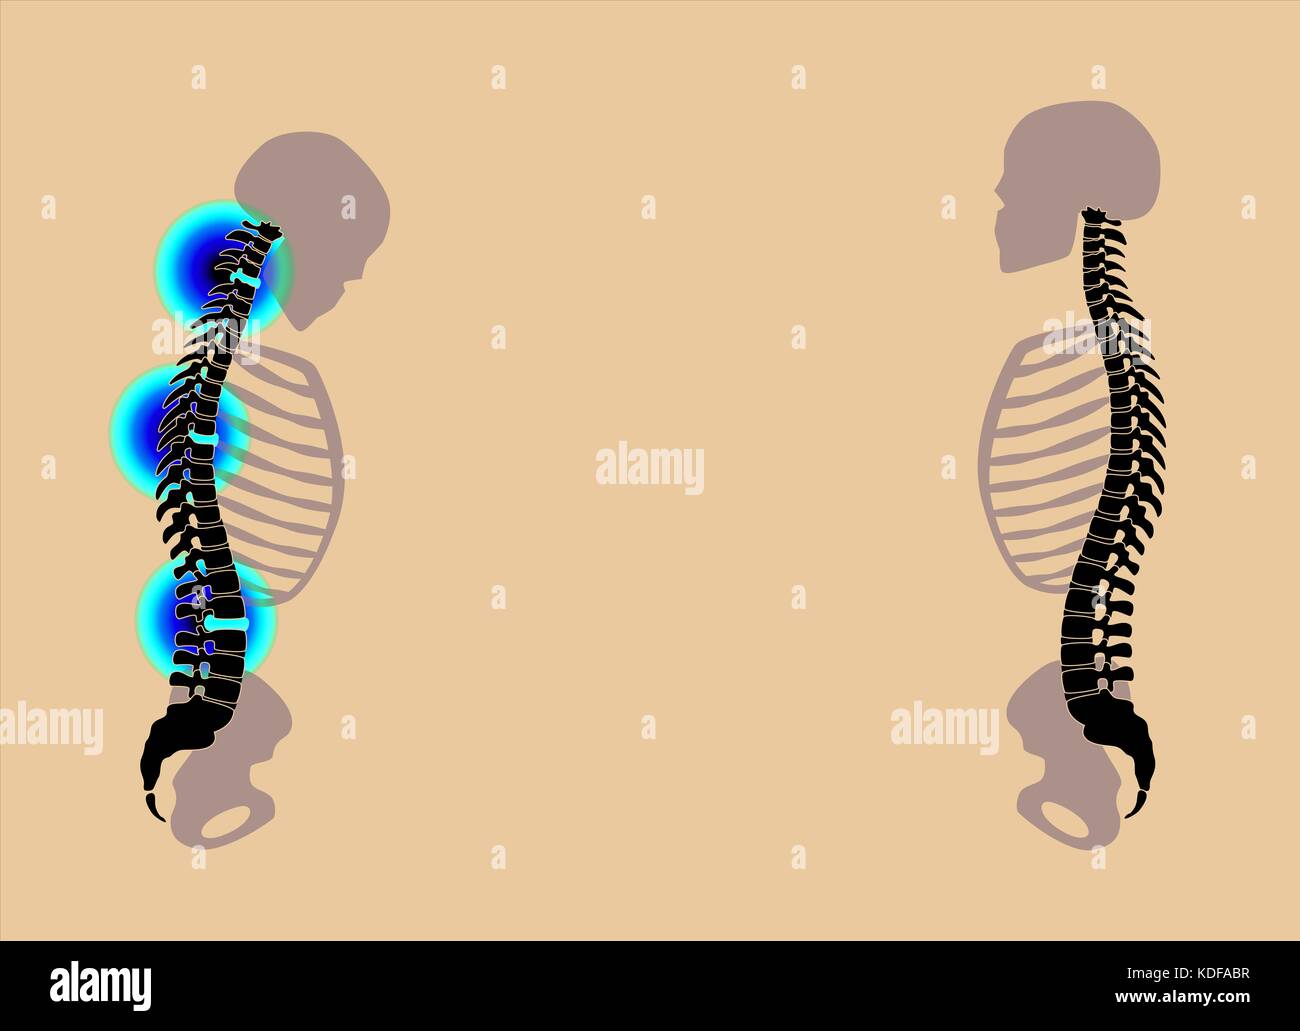 Back problems, neck aches, slipped disc prolapses - curved back with severe pain and healthy back in comparison - illustration on black background. Stock Photo